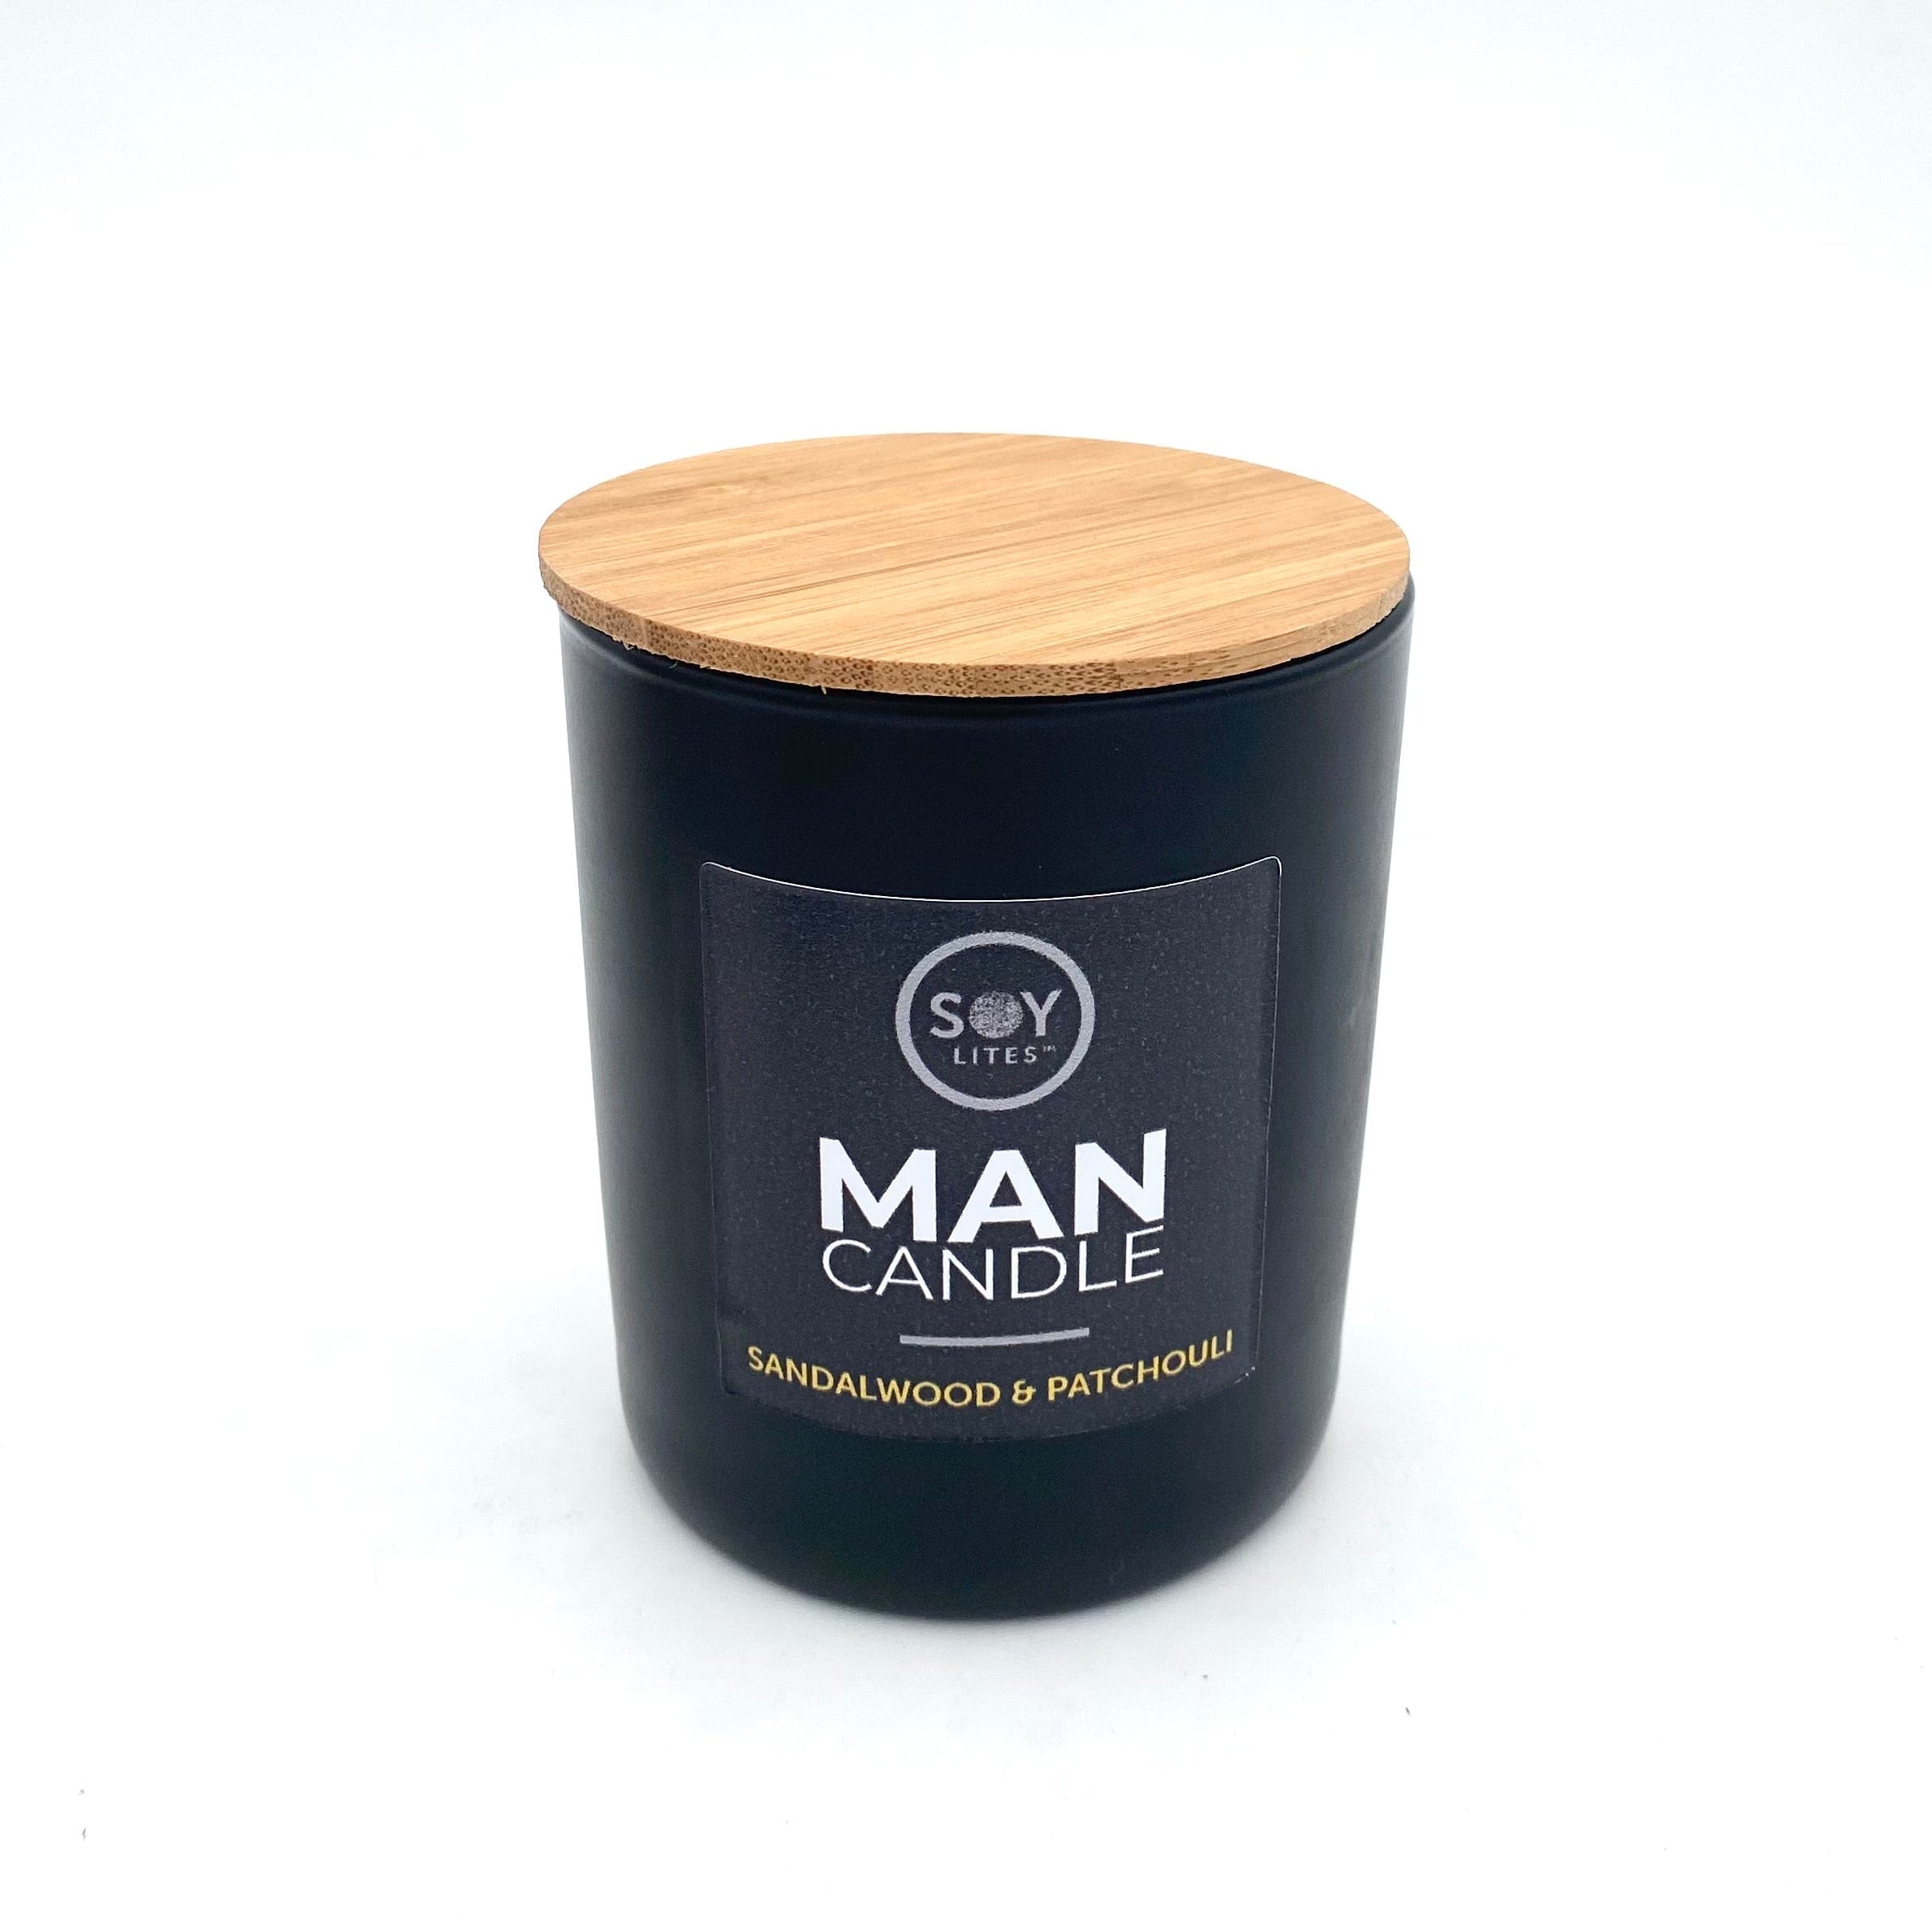 SoyLites Man Candle Man Candle - Sandlewood and Patchouli